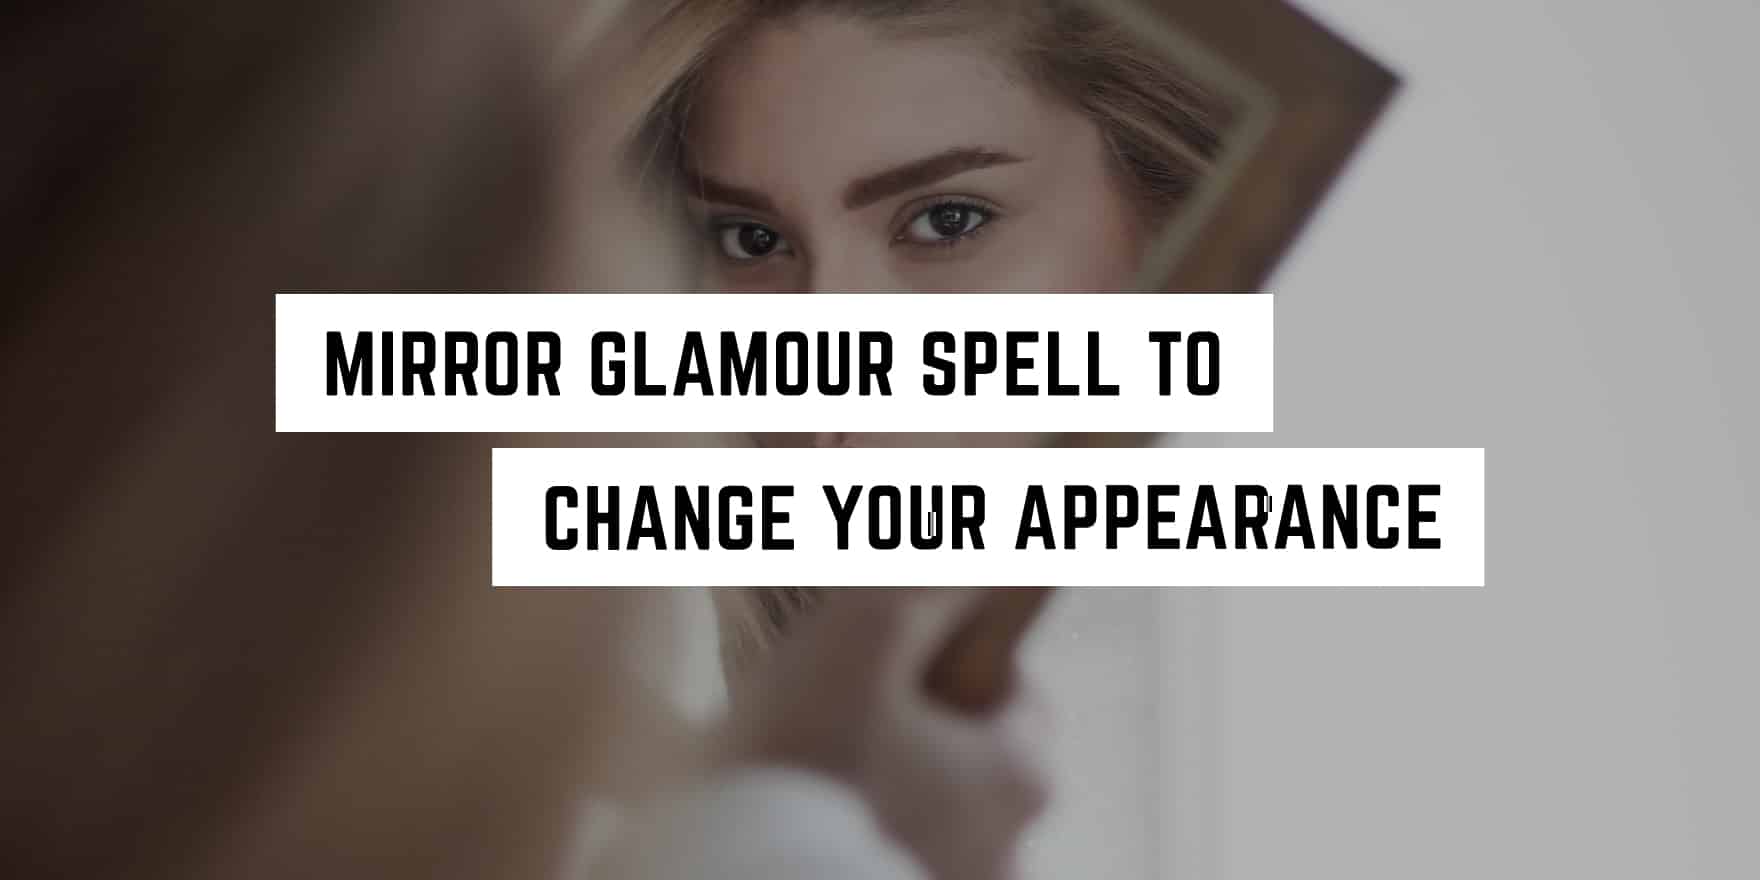 A woman reflecting on her beauty in the mirror with text overlay suggesting a magical transformation: "Metaphysical mirror glamour spell to change your appearance.